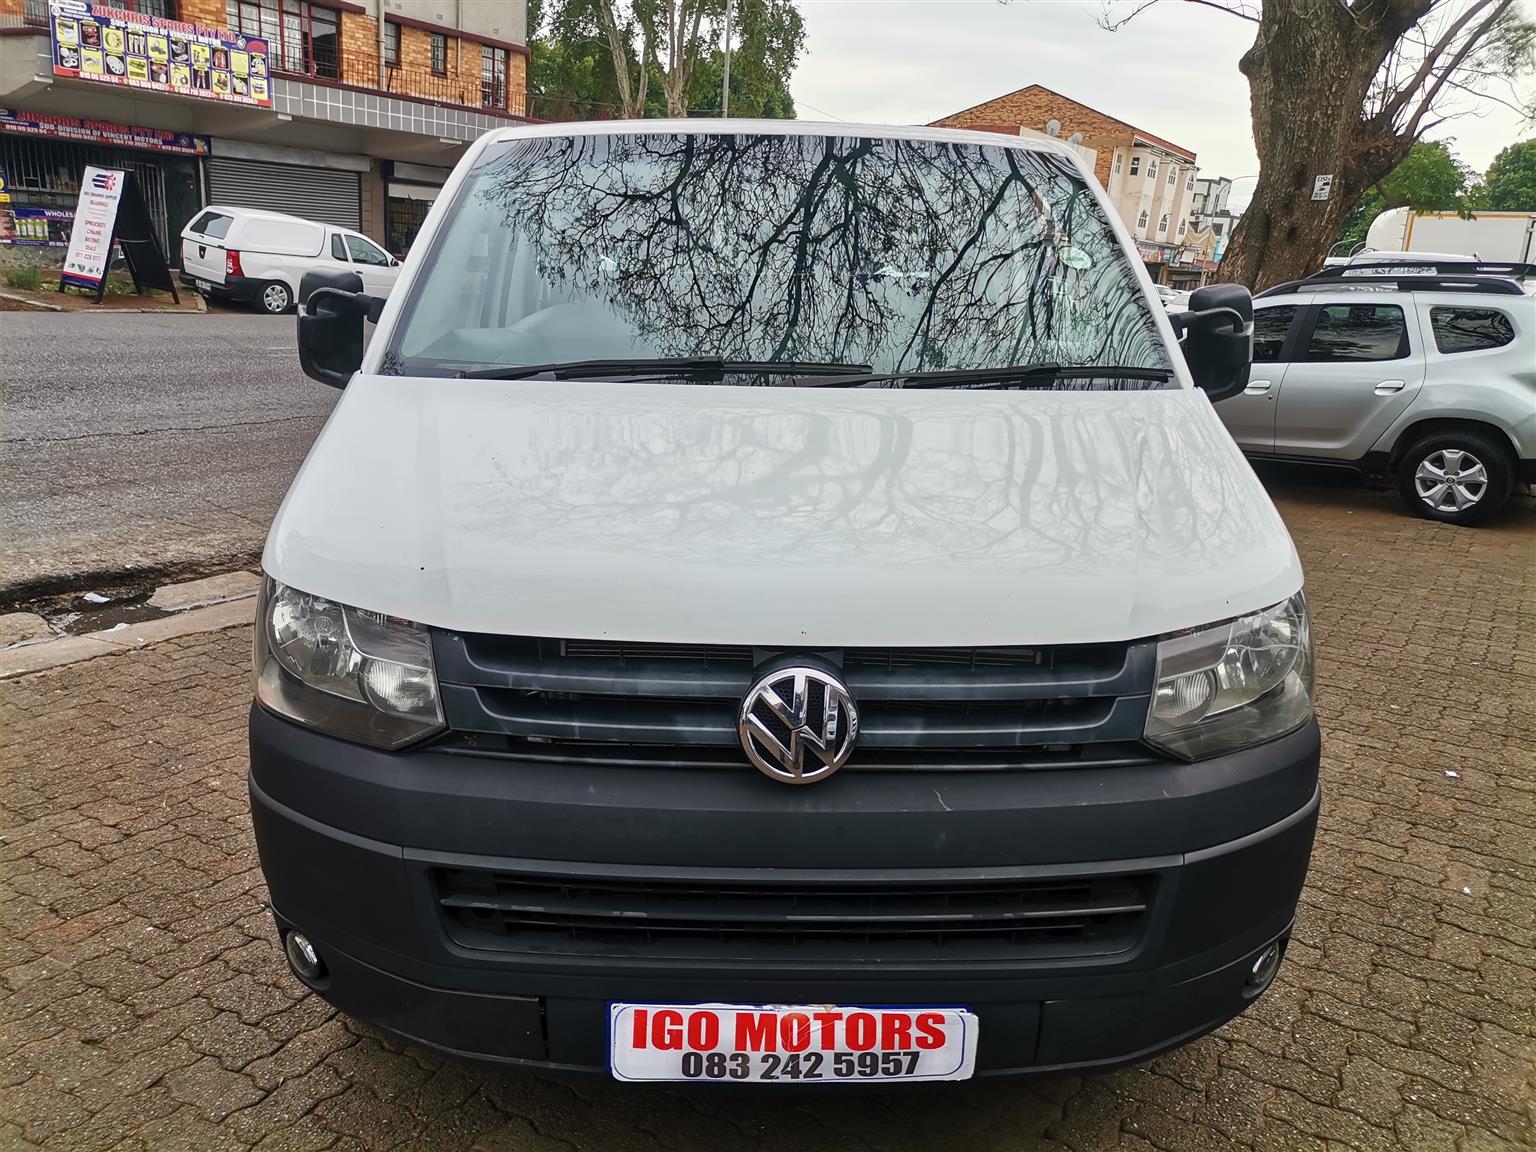 2016 VW TRANSPORTER Double Cab 2.0TDI manual Mechanically perfect